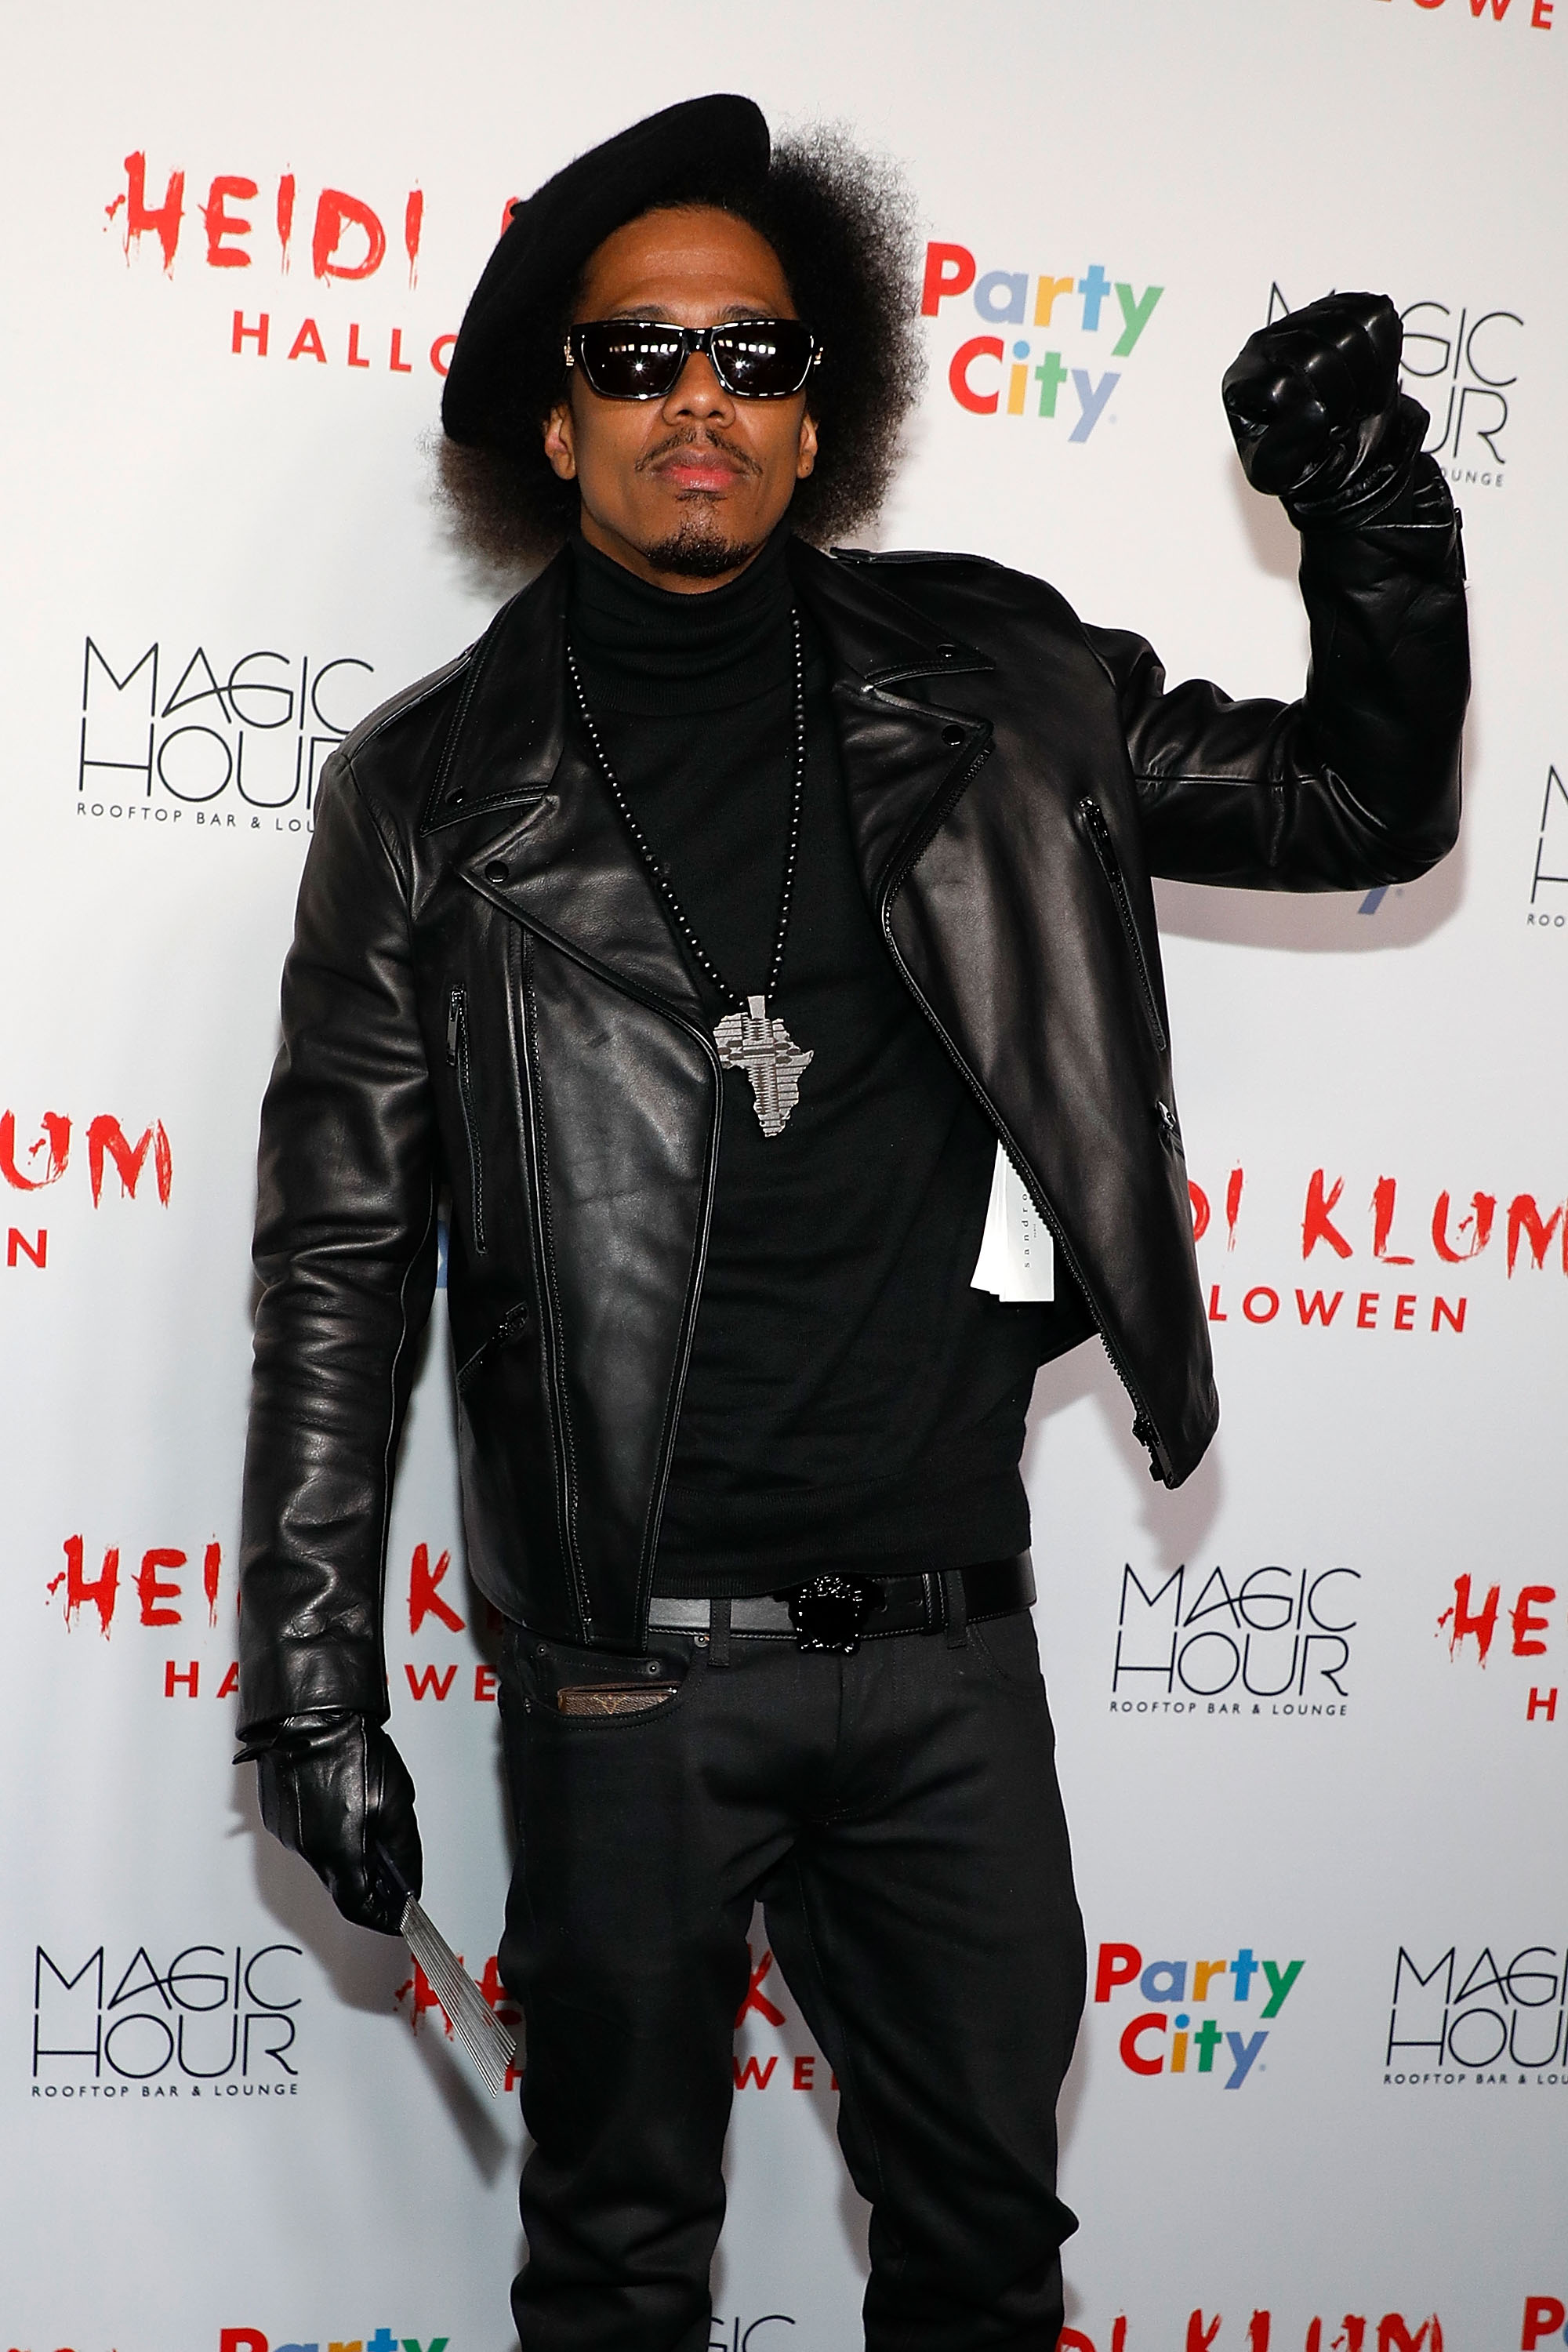 Nick Cannon channeled the Black Panthers for Halloween this year.